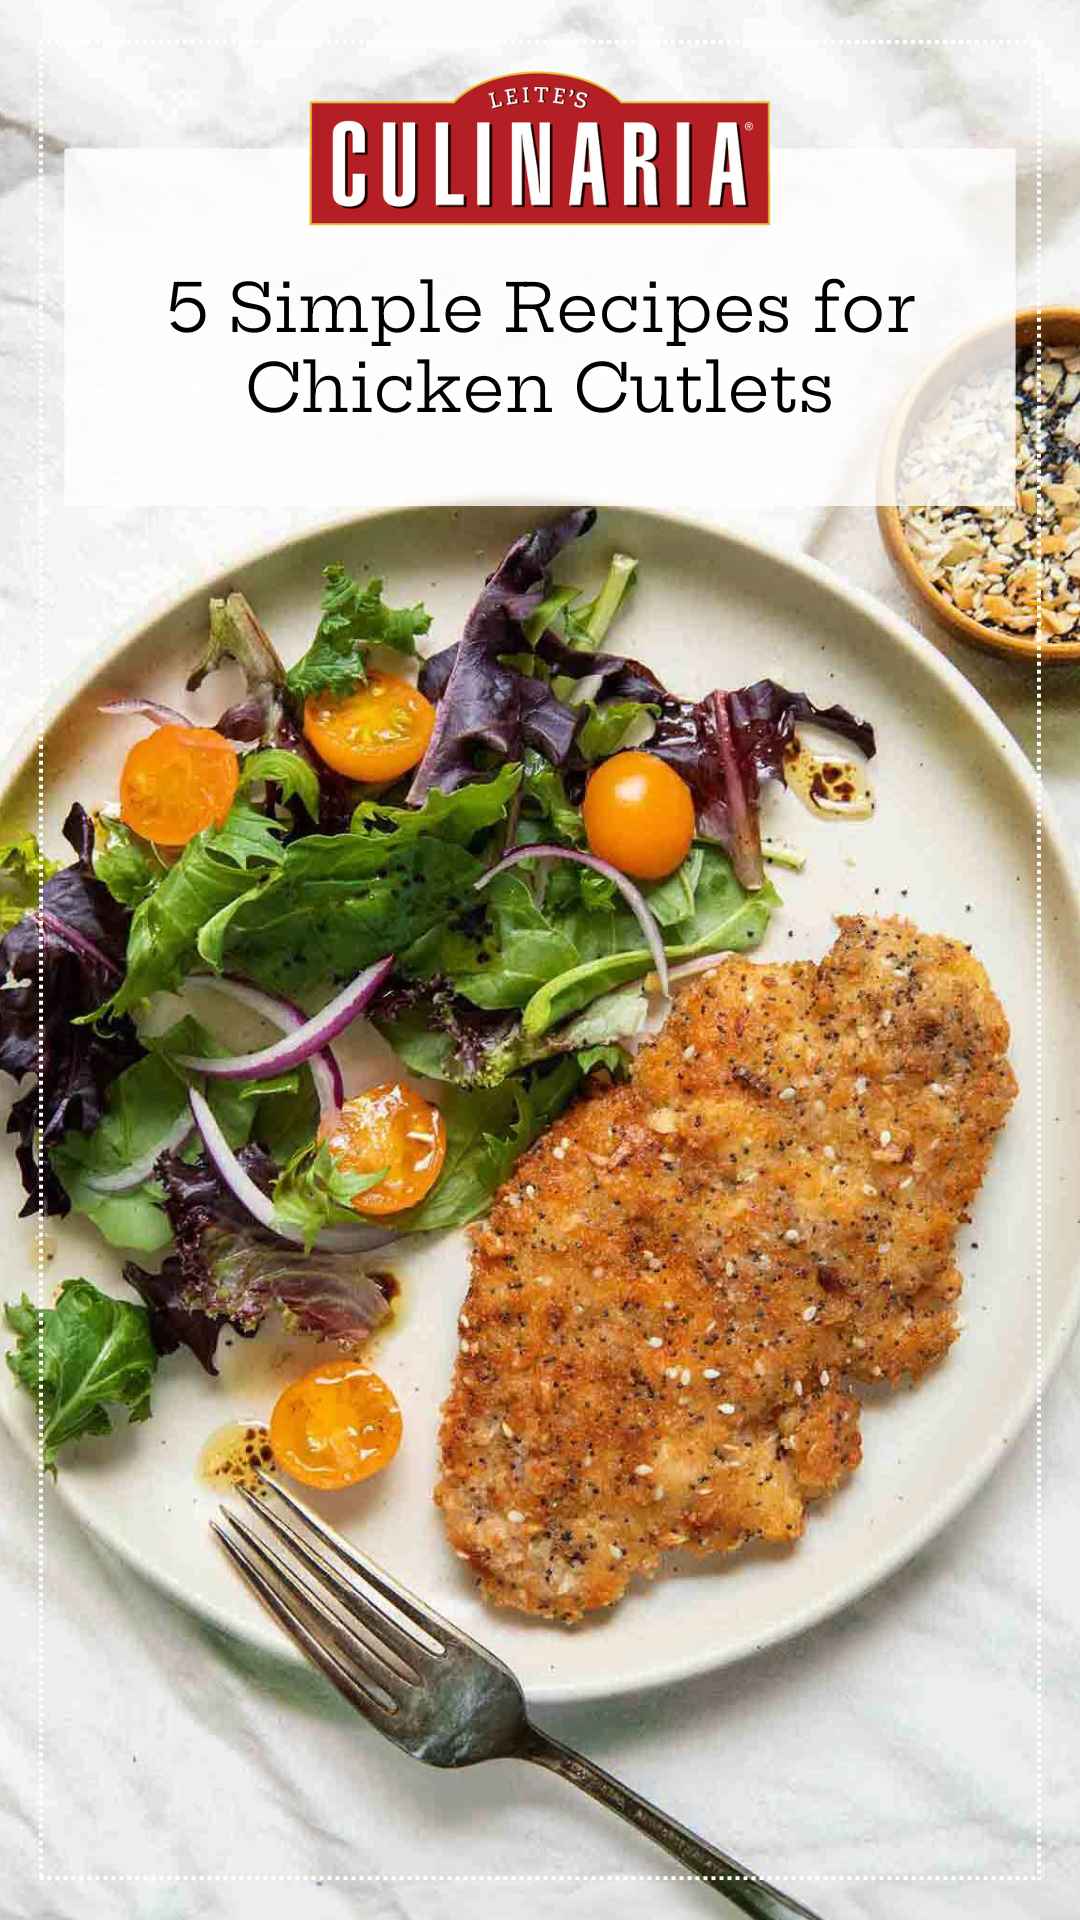 A breaded chicken cutlet on a plate with a salad of mixed greens, red onion, and cherry tomatoes.